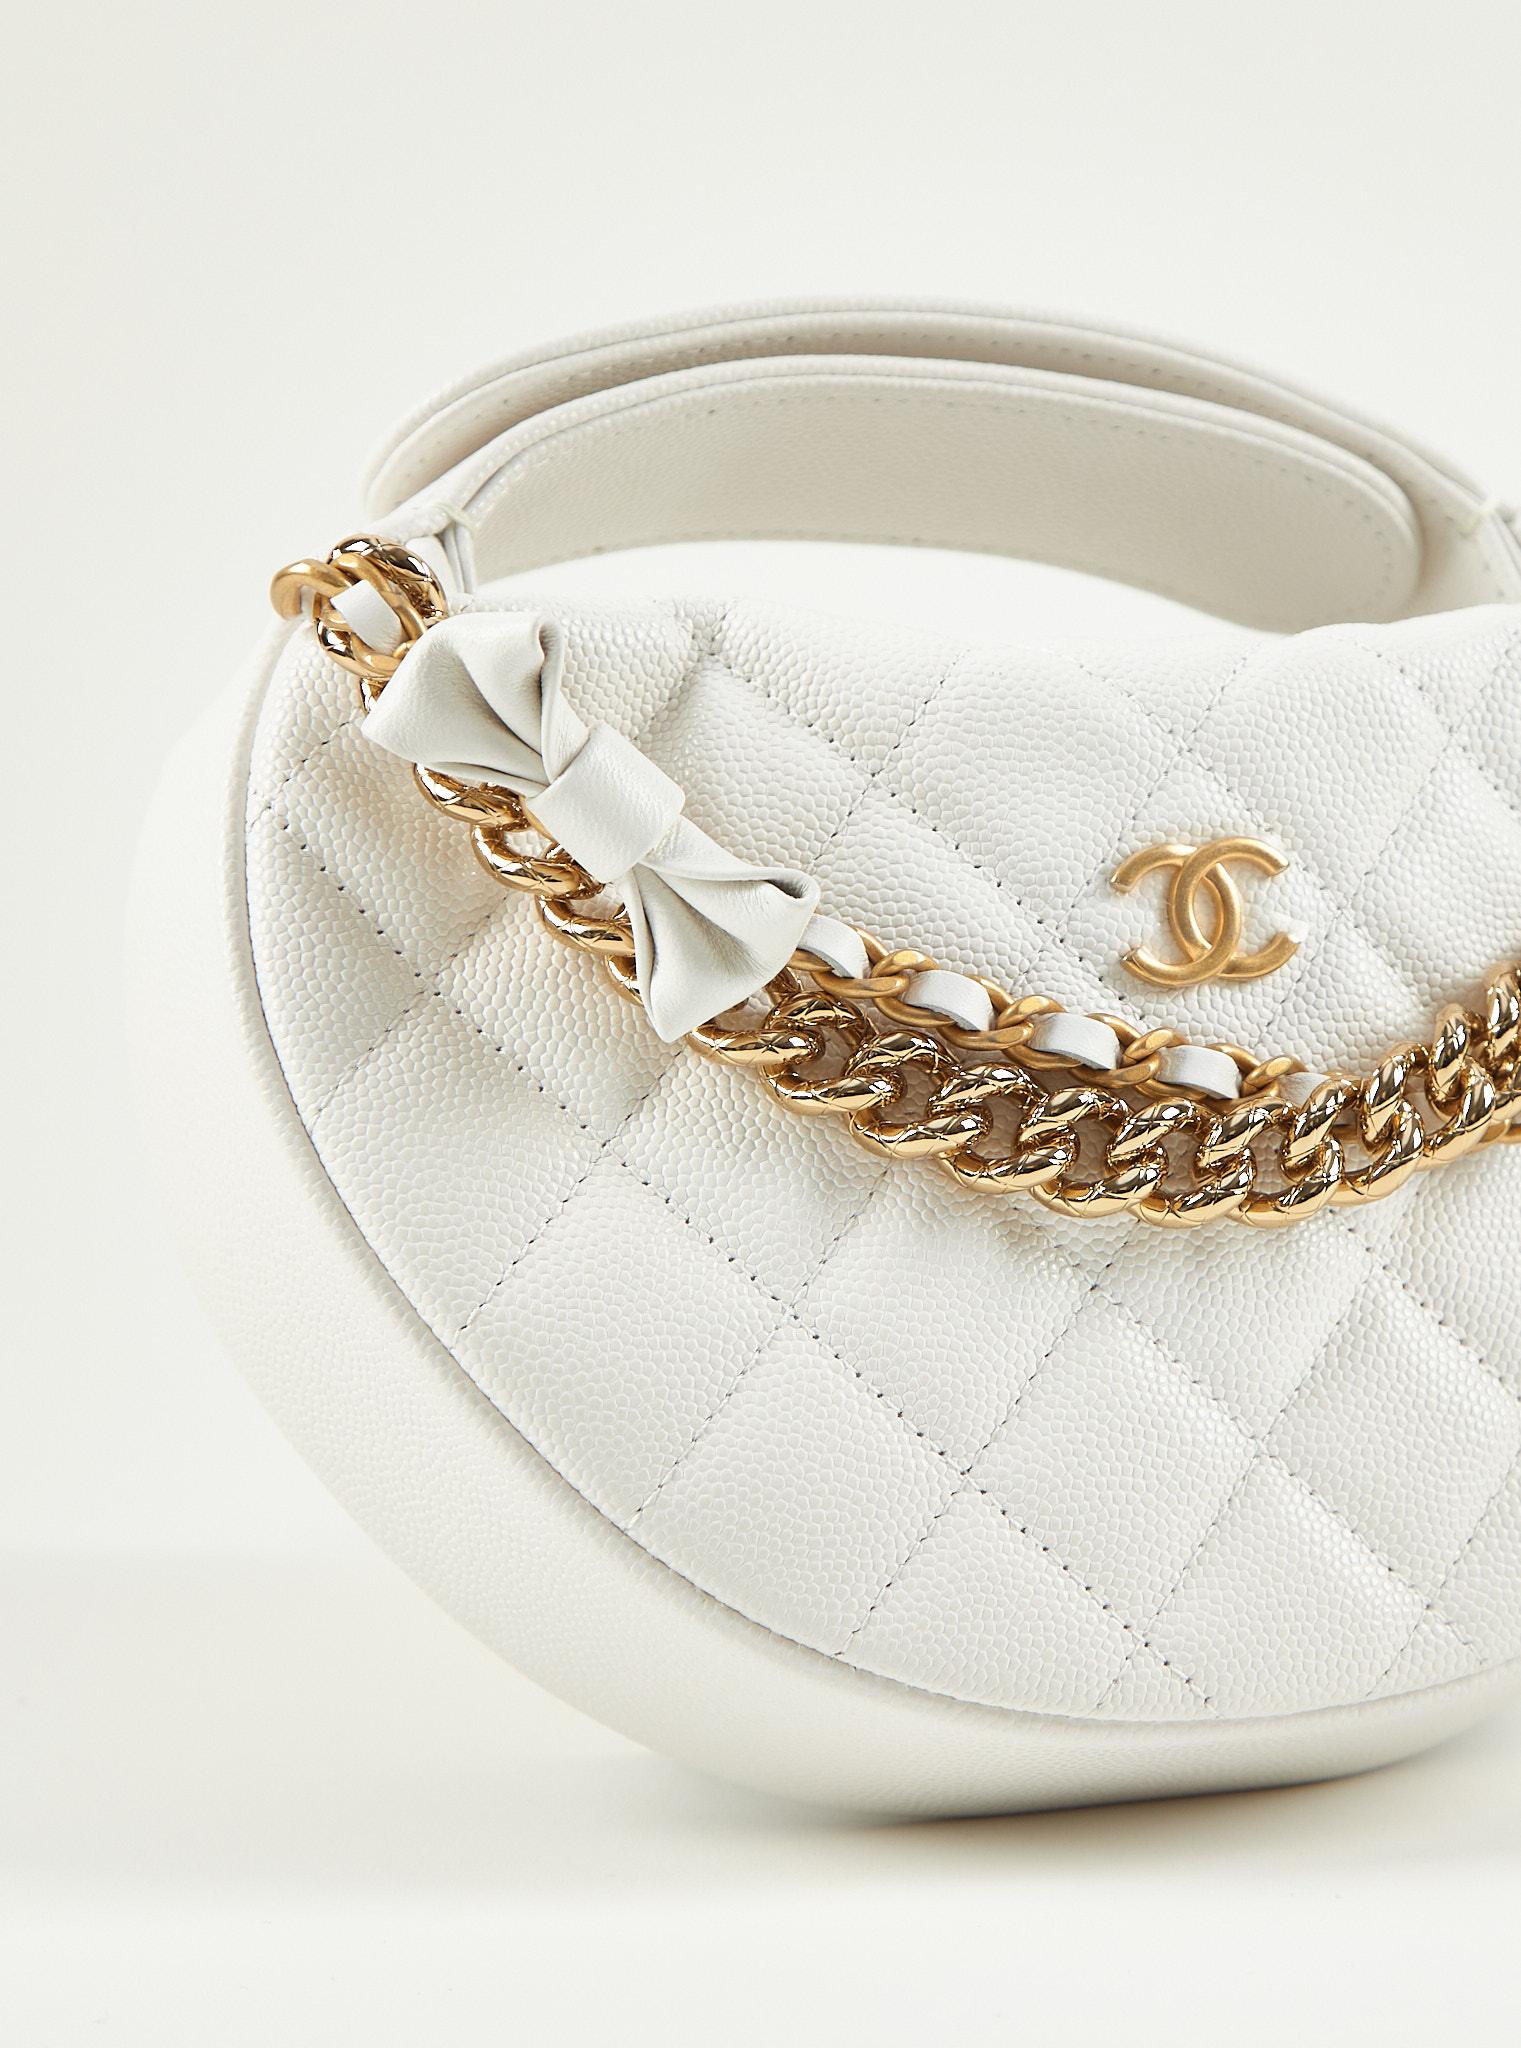 CHANEL MINI LOOP CHANGE PURSE WITH CHAINS WHITE Caviar Leather with Gold-Tone Ha In Excellent Condition For Sale In London, GB